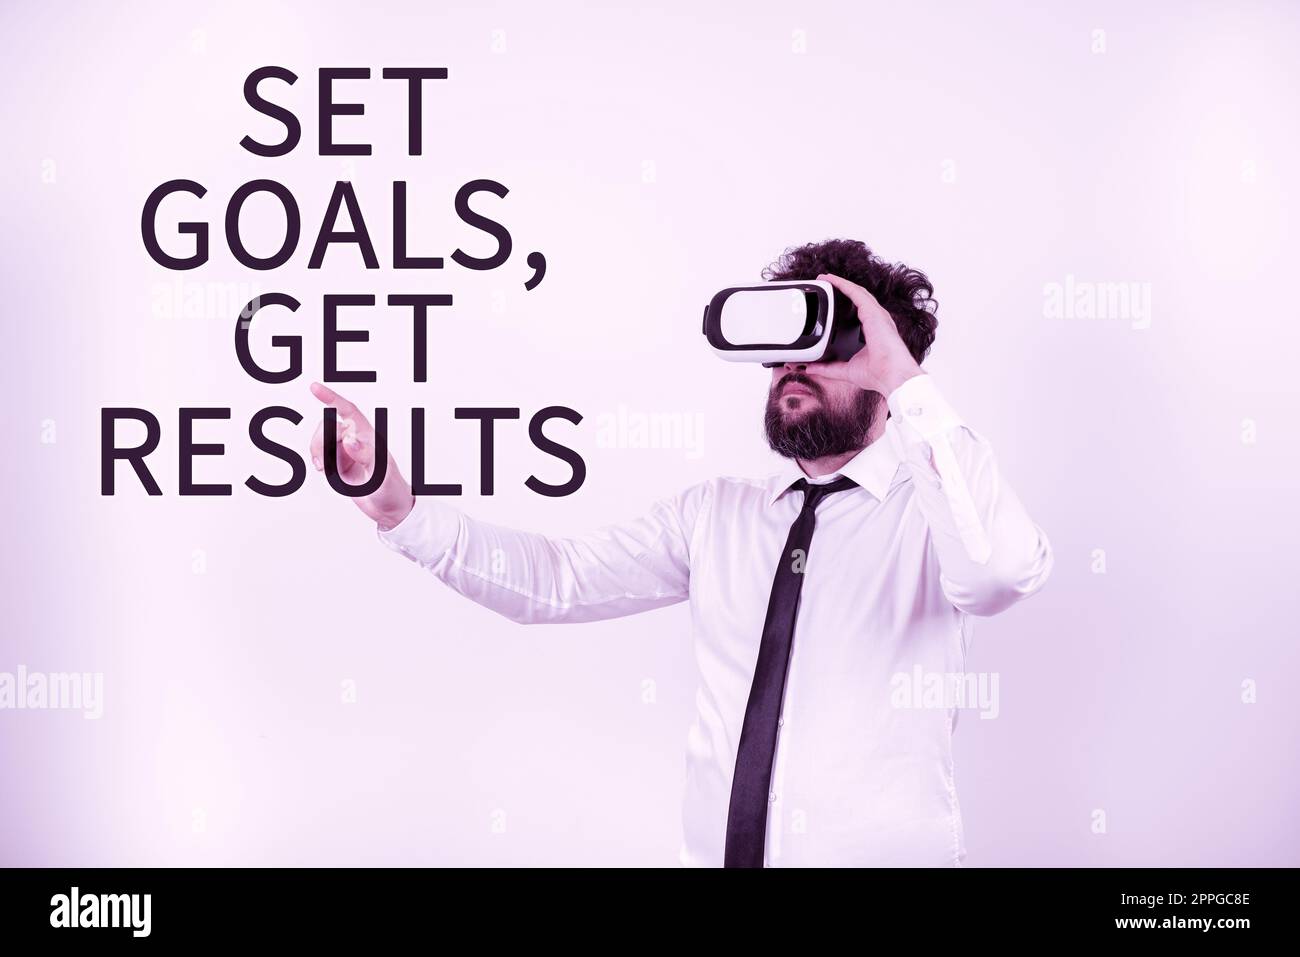 Inspiration showing sign Set Goals, Get Results. Business approach Establish objectives work for accomplish them Stock Photo